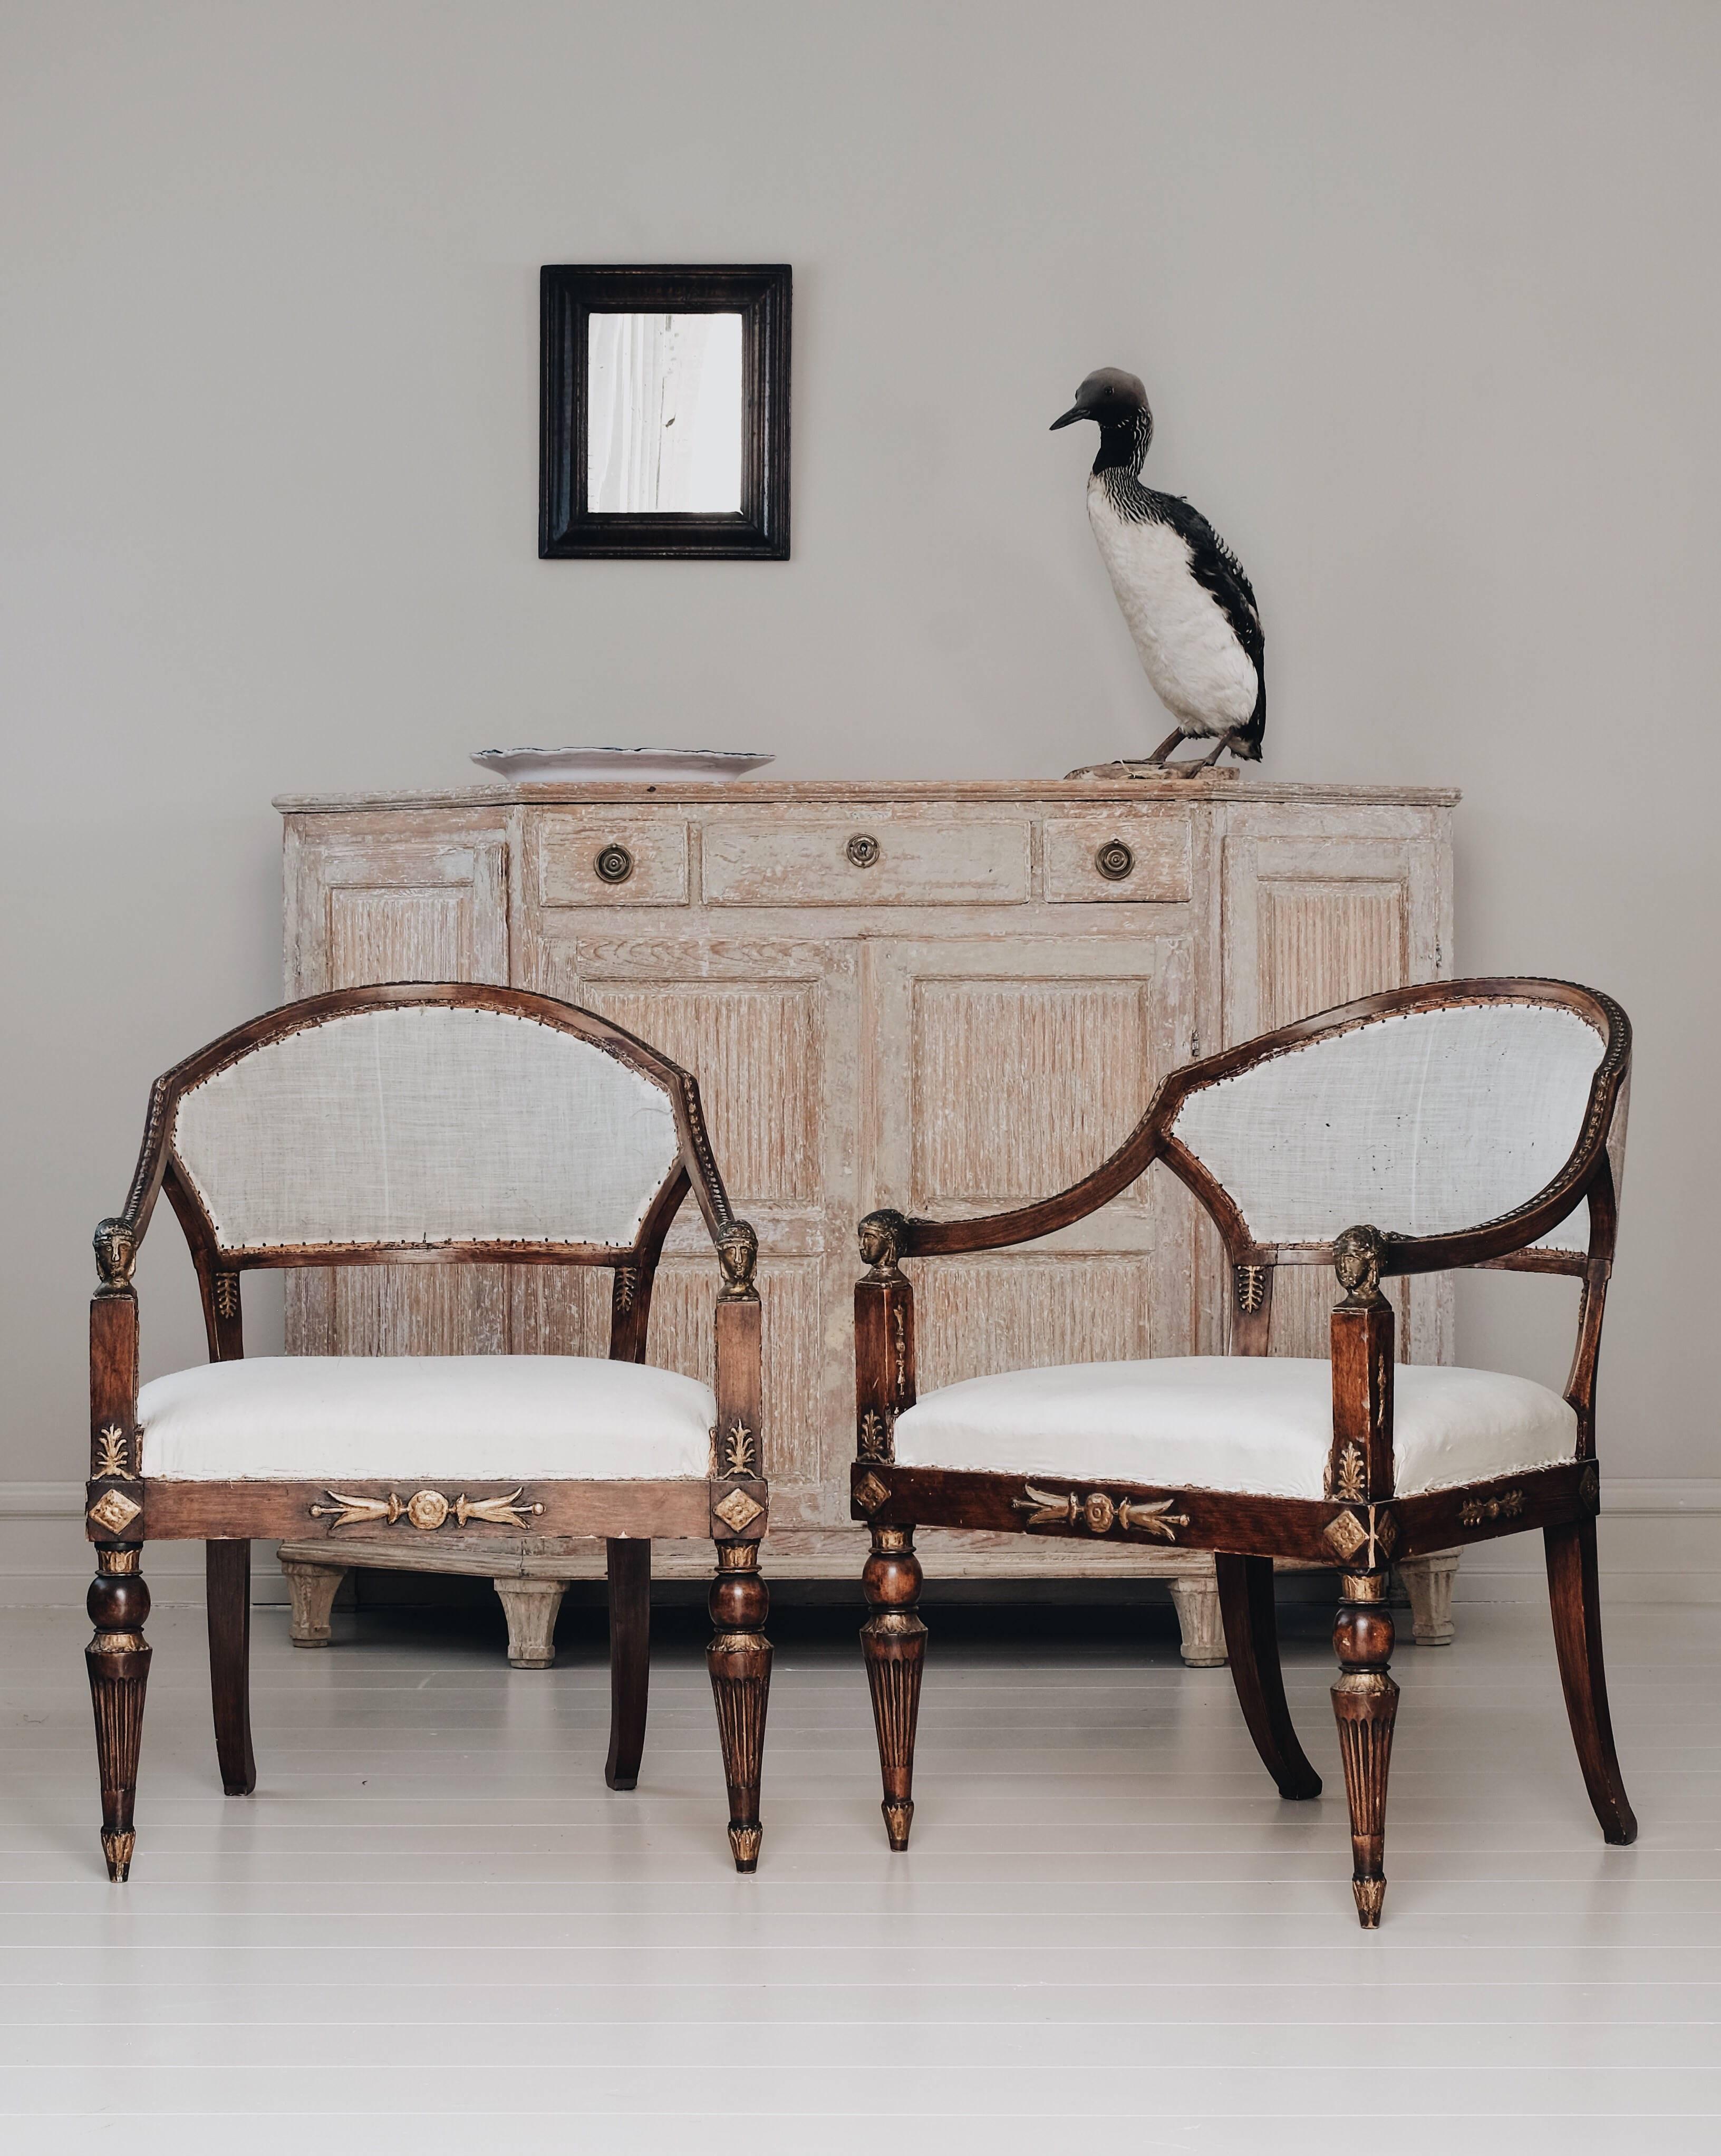 Exceptional pair of late Gustavian armchairs in the Egyptian taste in its original condition, circa 1810. Made in Stockholm by a master chair maker after drawing by architect Carl Christoffer Gjörwell (1766-1837) 

Gjörwell was a city architect in